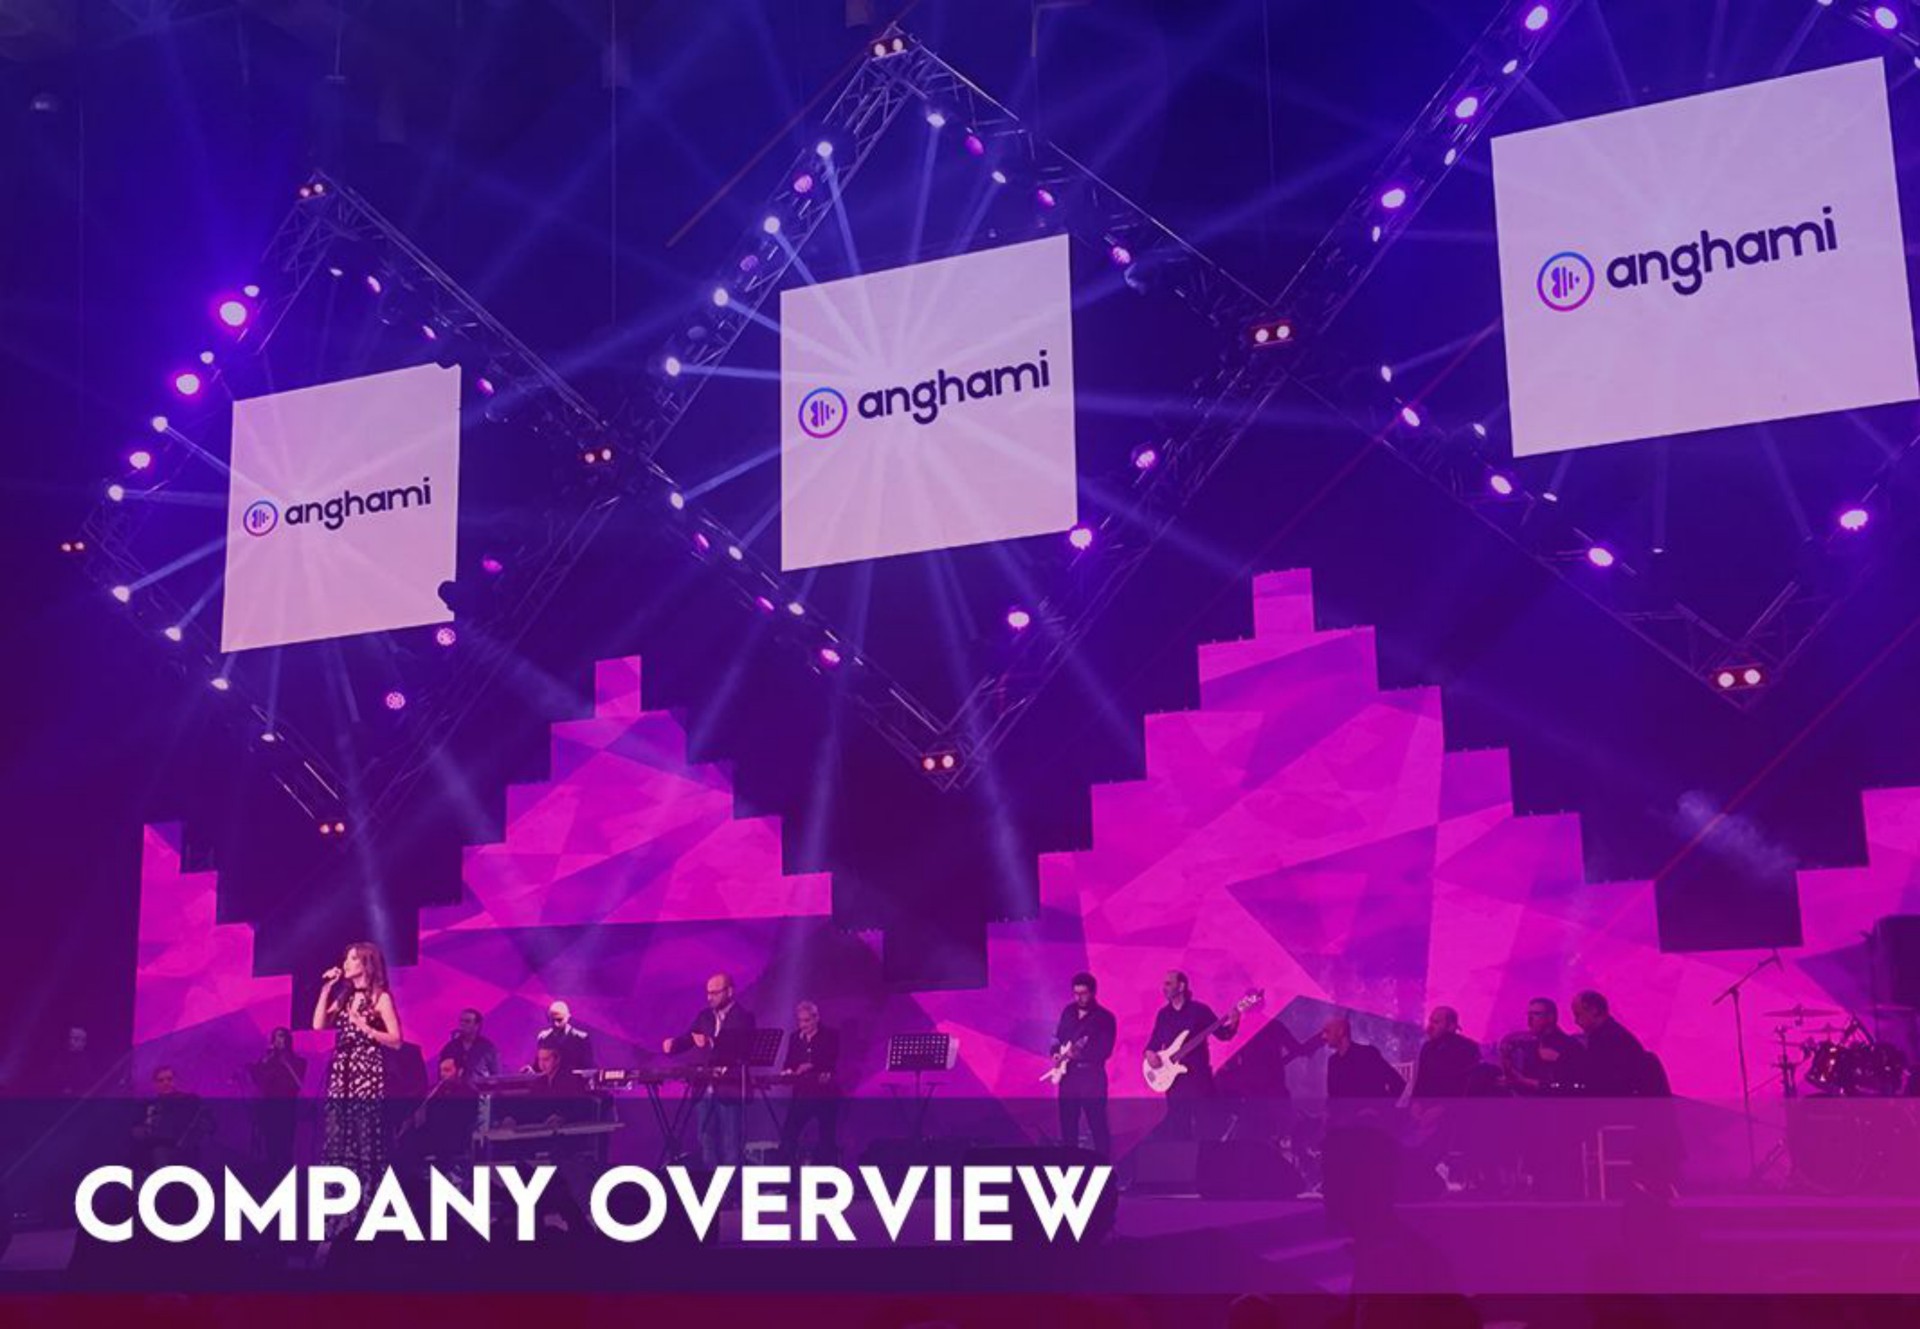 a company overview | Anghami